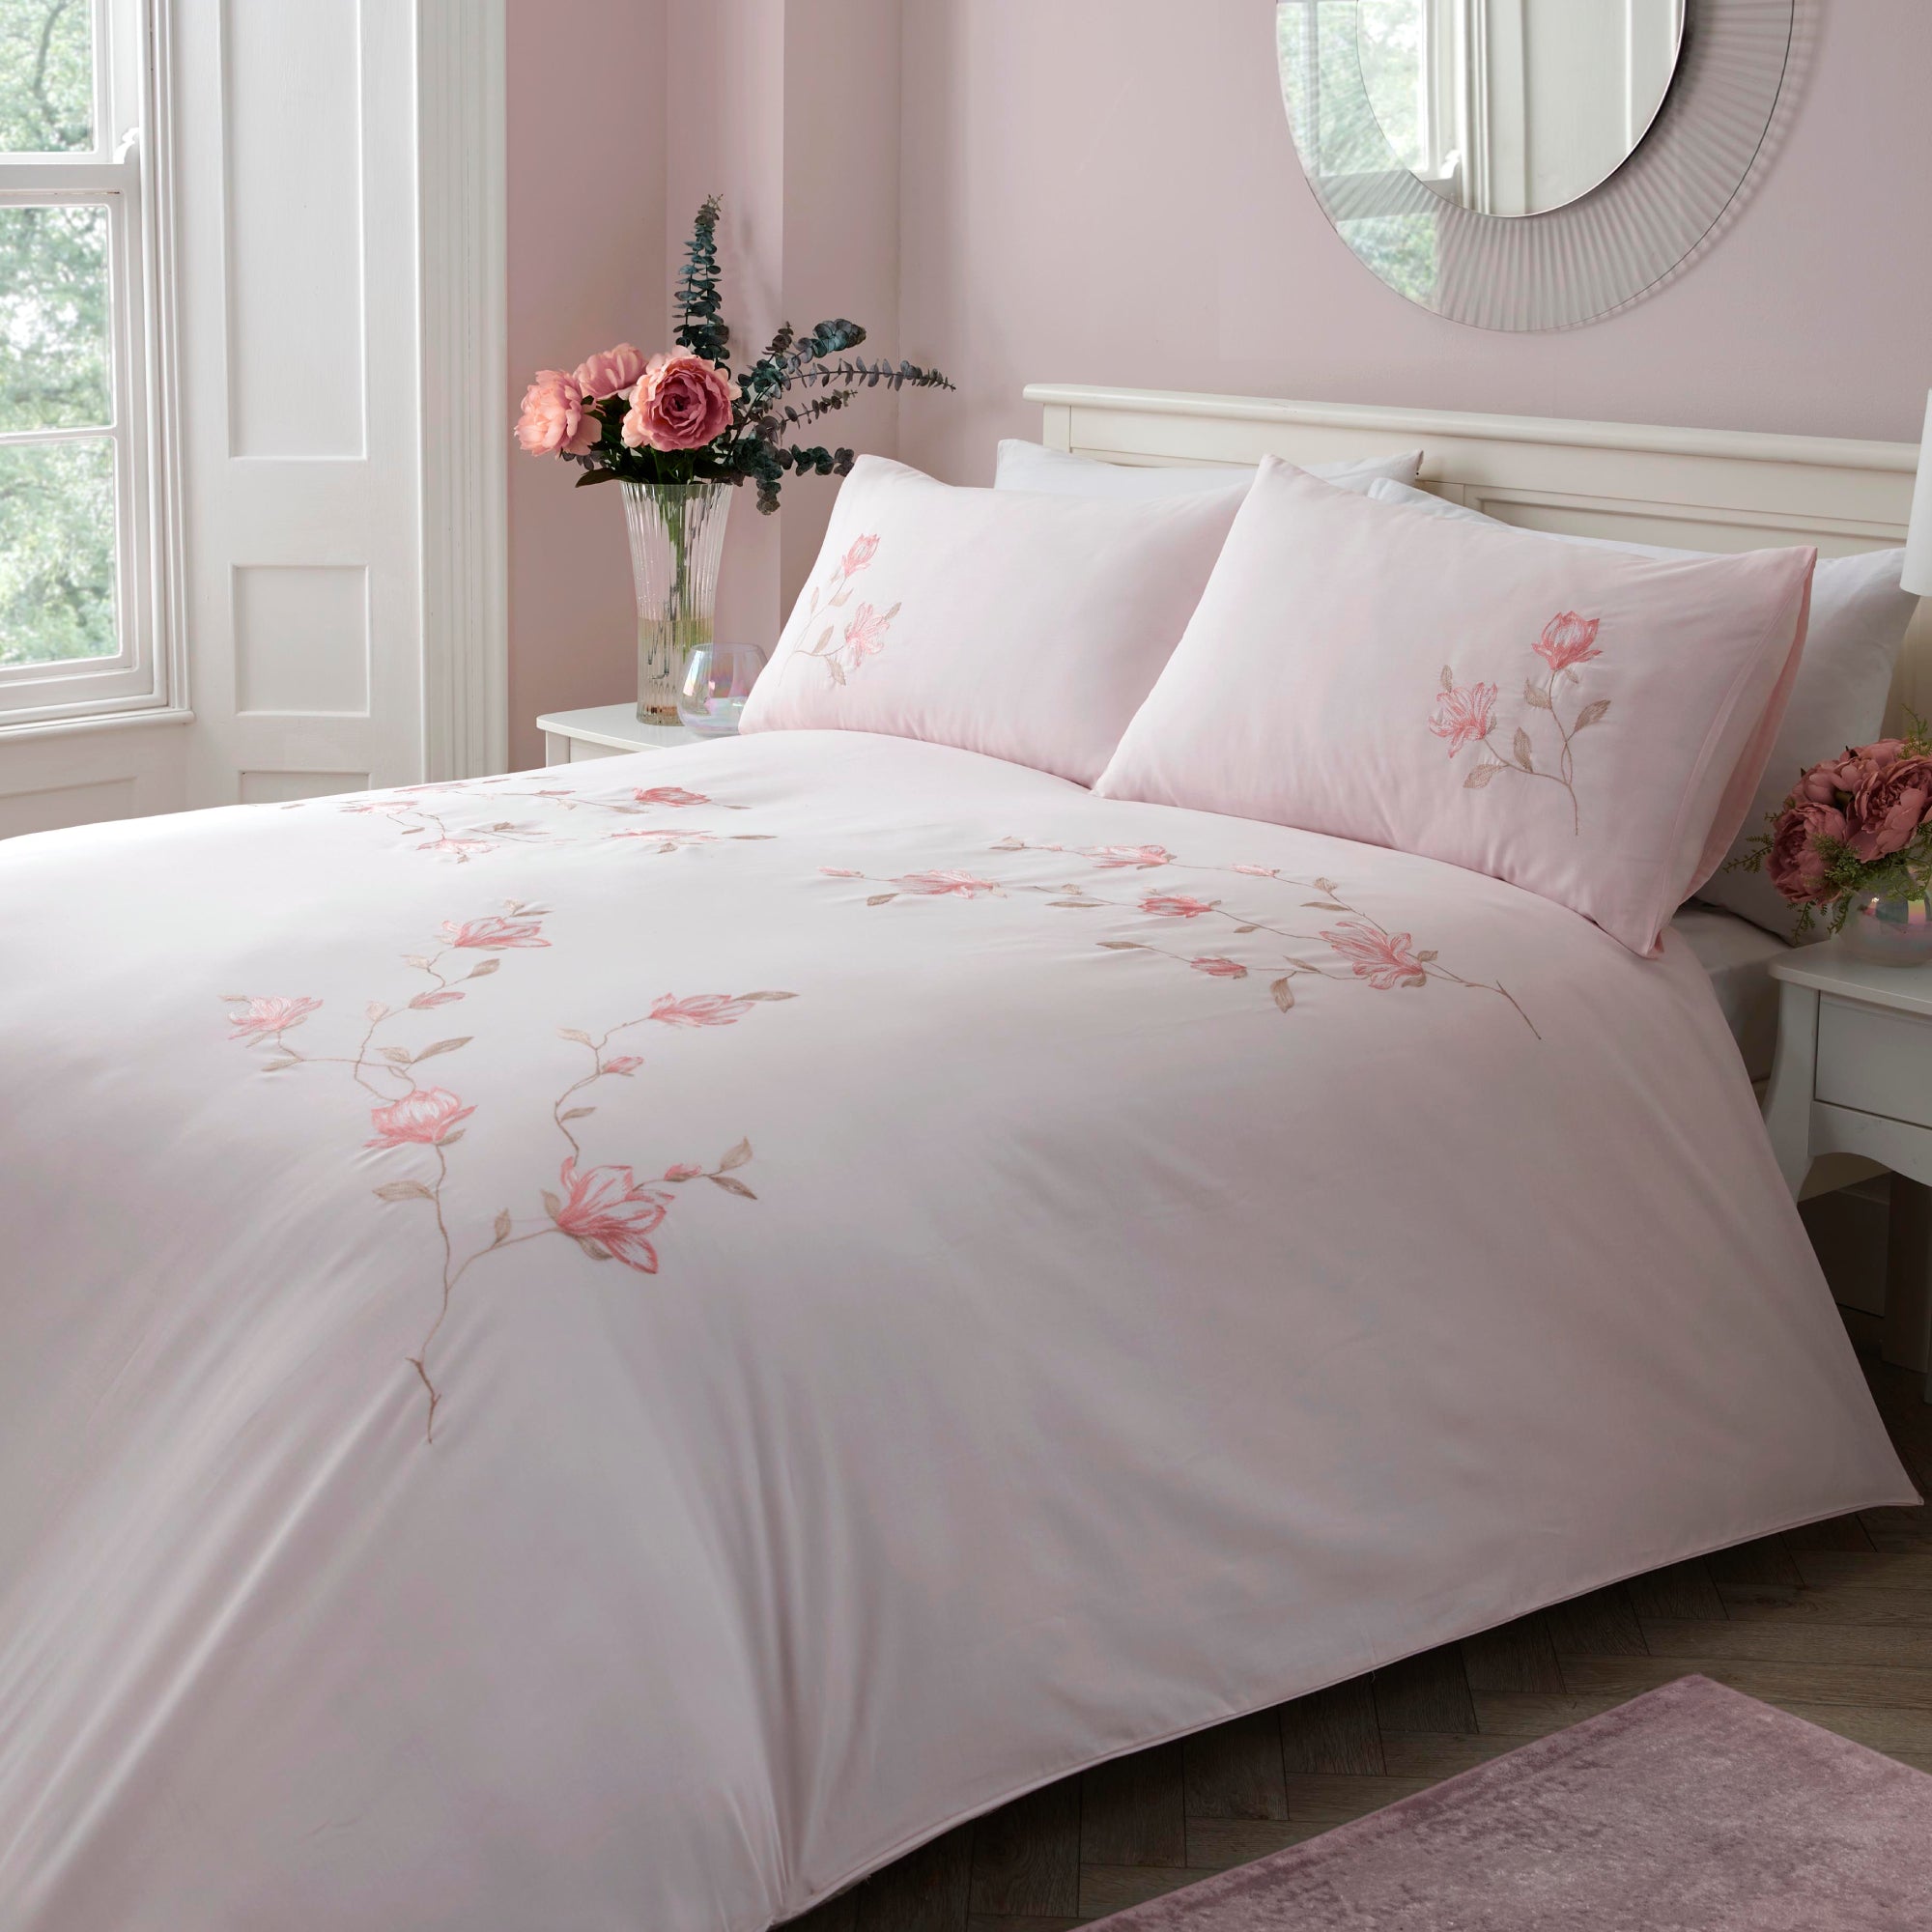 Duvet Cover Set Margot by Dreams & Drapes Woven in Pink